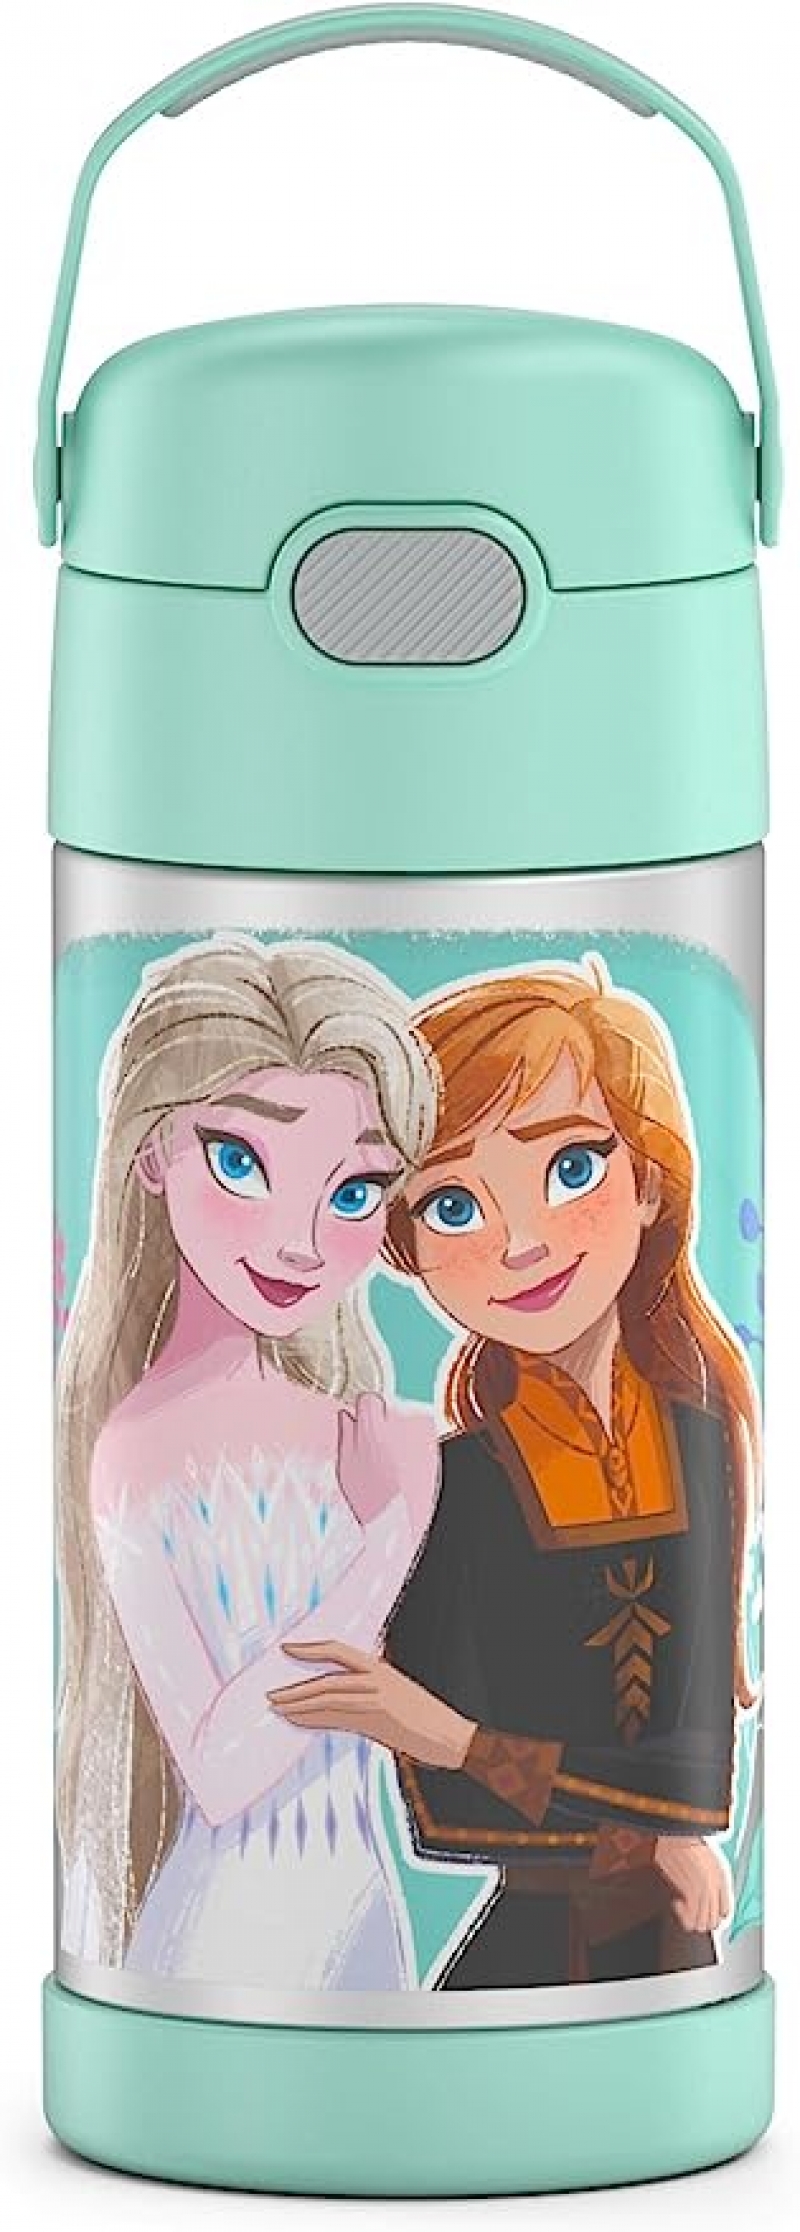 ihocon: THERMOS FUNTAINER 12 Ounce Stainless Steel Vacuum Insulated Kids Straw Bottle, Frozen 2  不銹鋼兒童保冷吸管水瓶